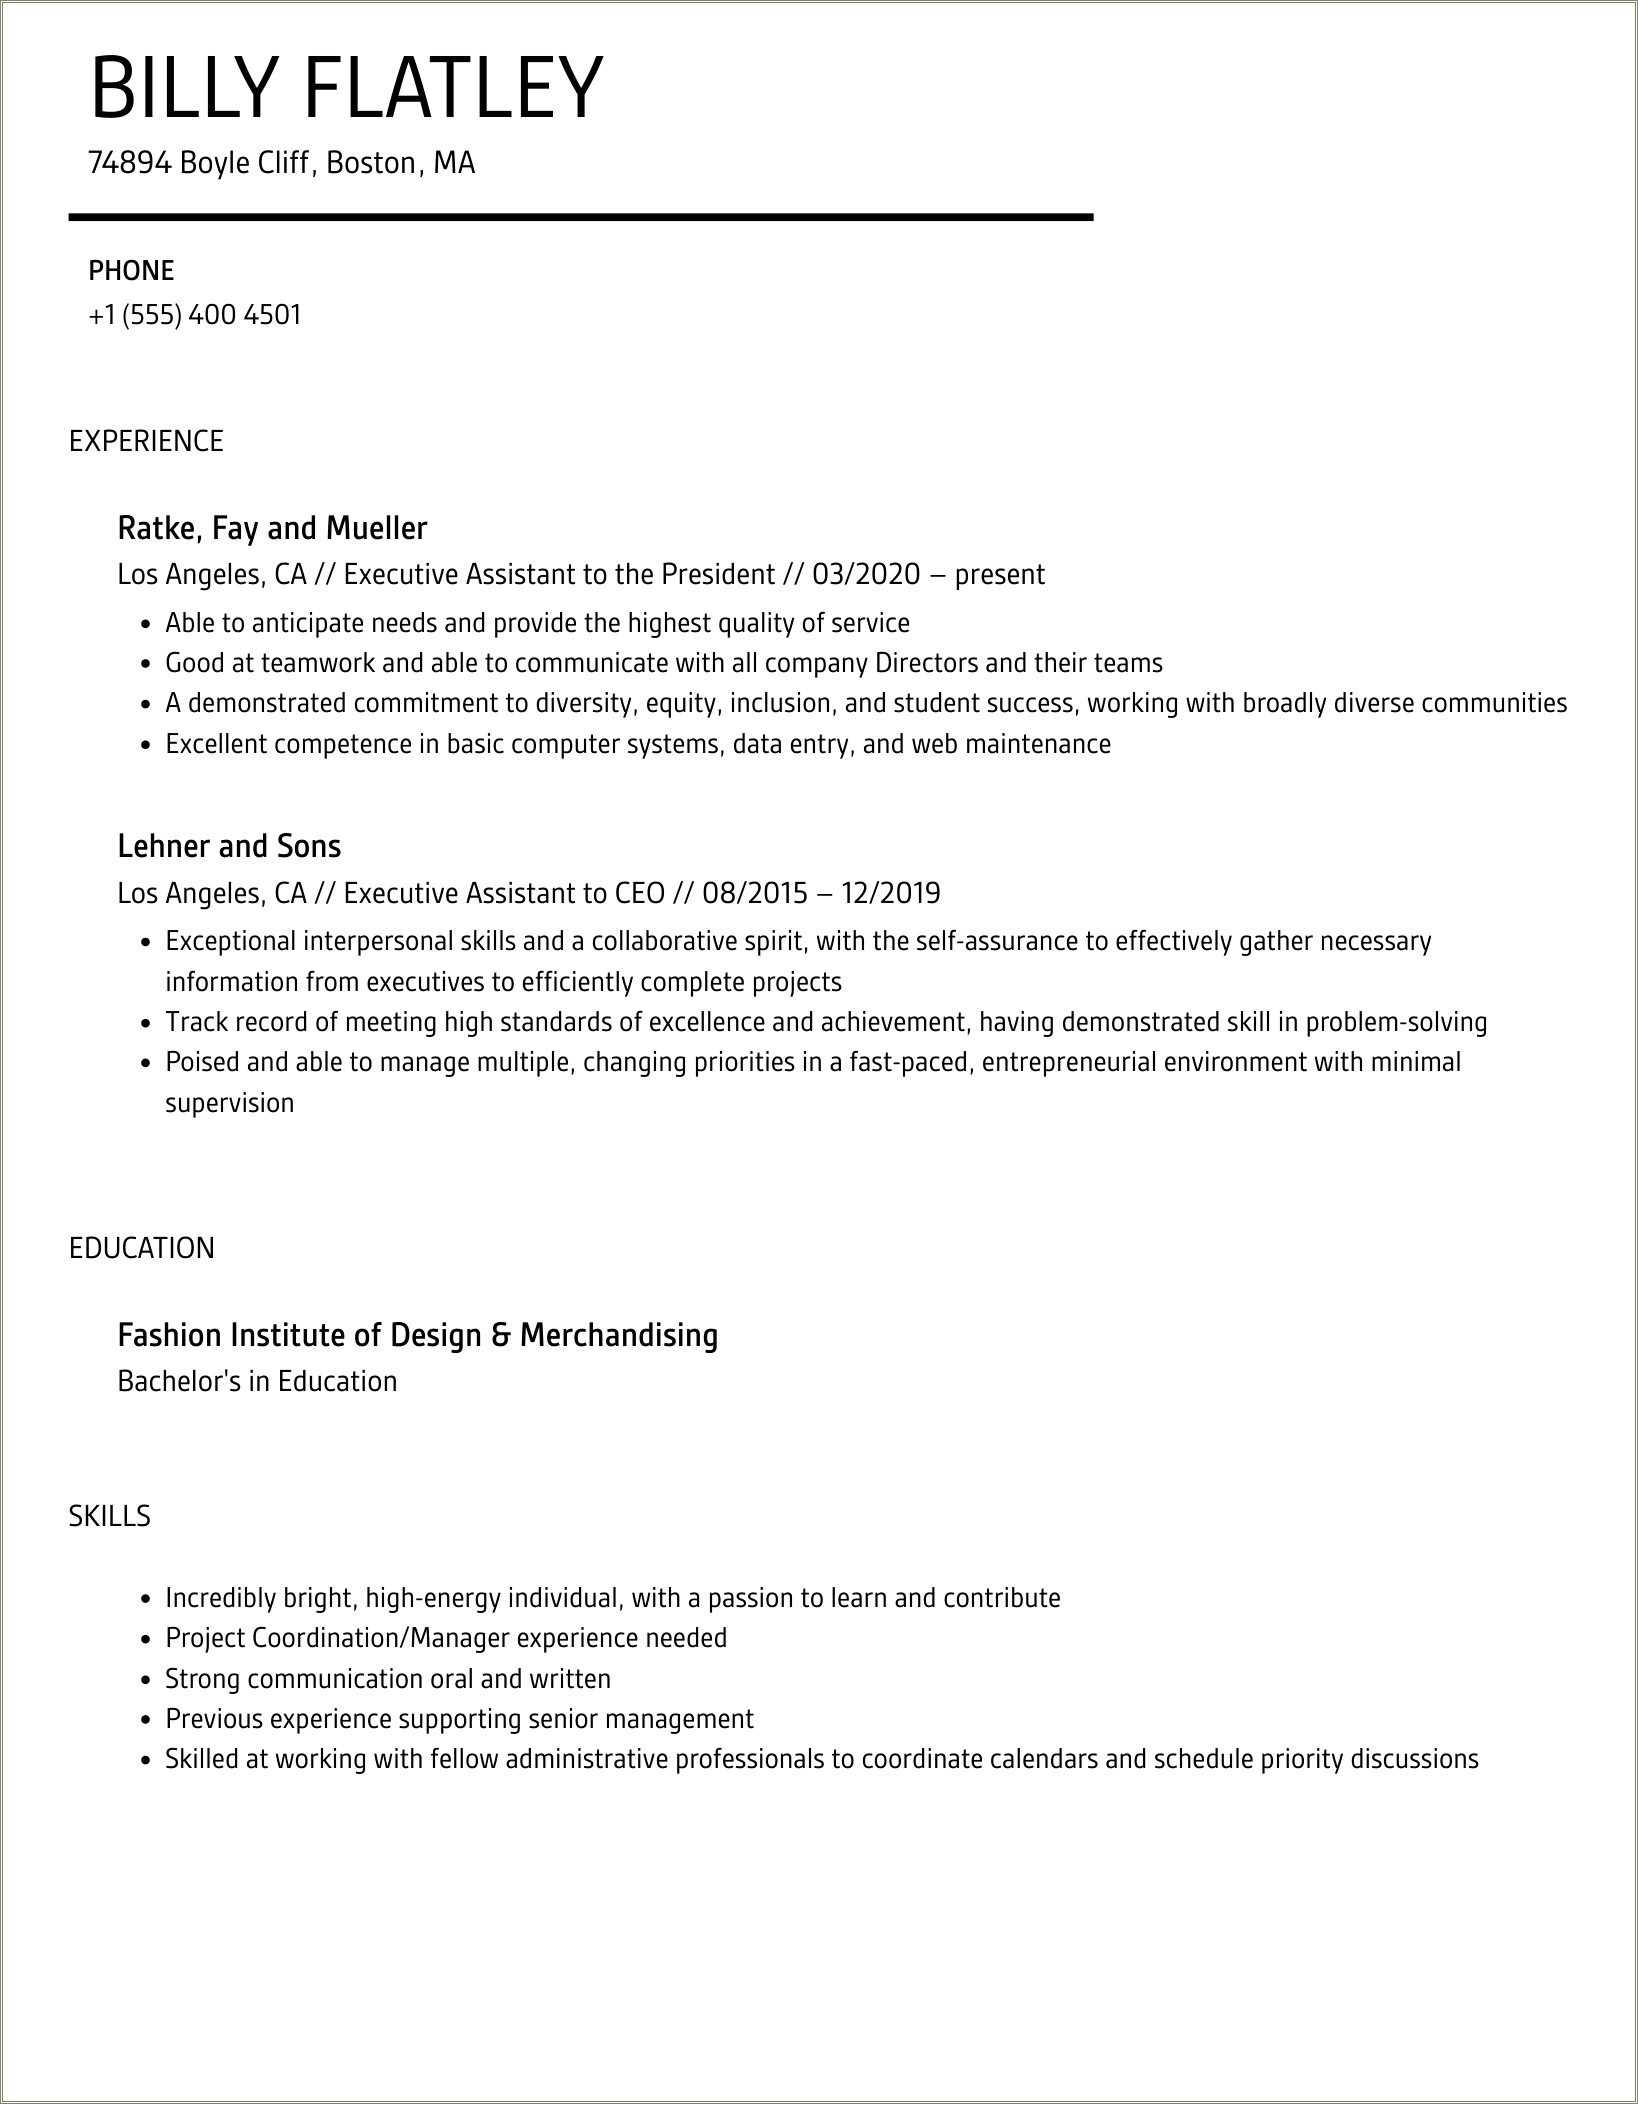 Resume Objective Statement For Executive Assistant To Ceo